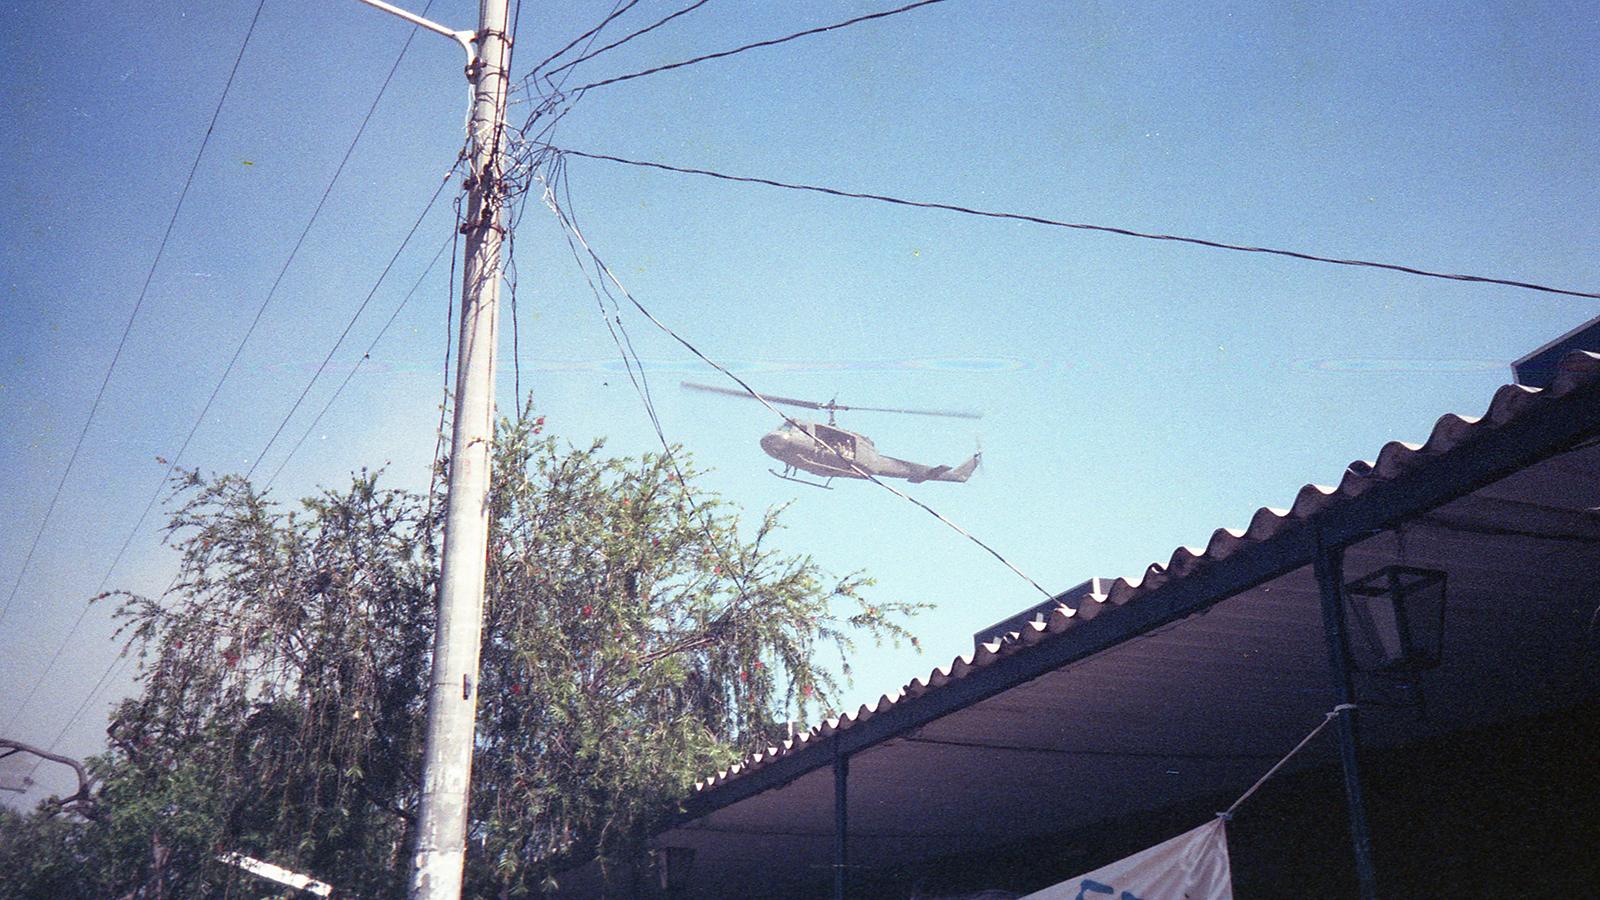 A helicopter flying over the San Salvador march